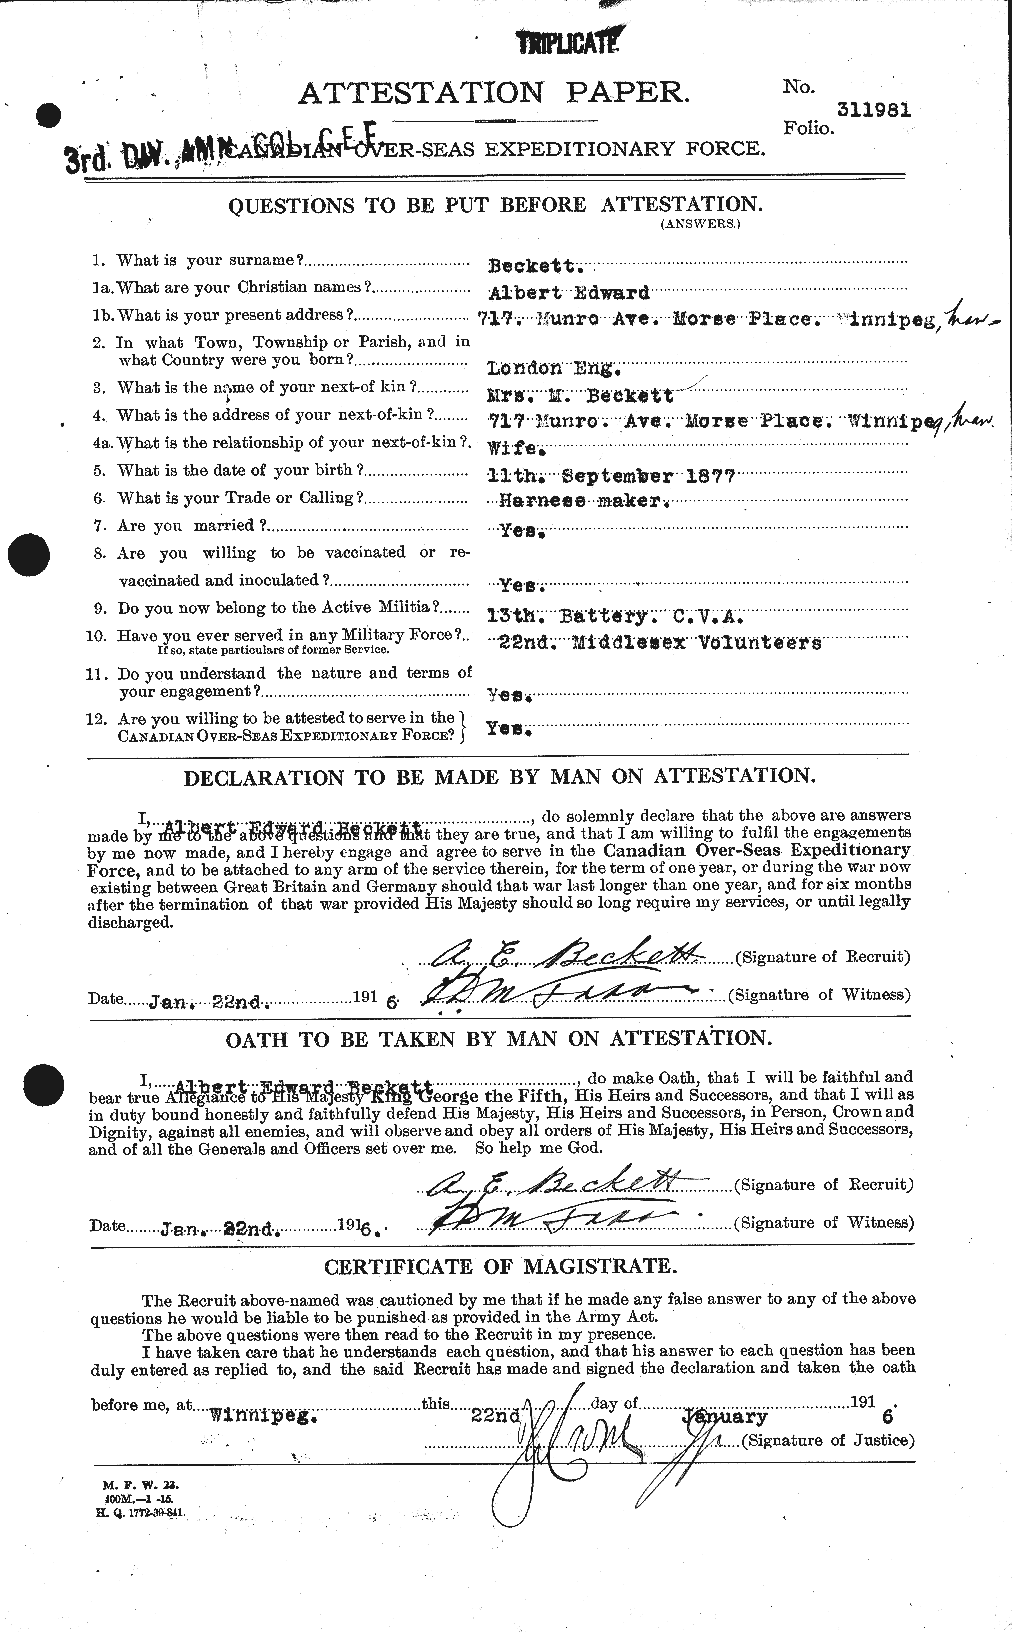 Personnel Records of the First World War - CEF 232334a